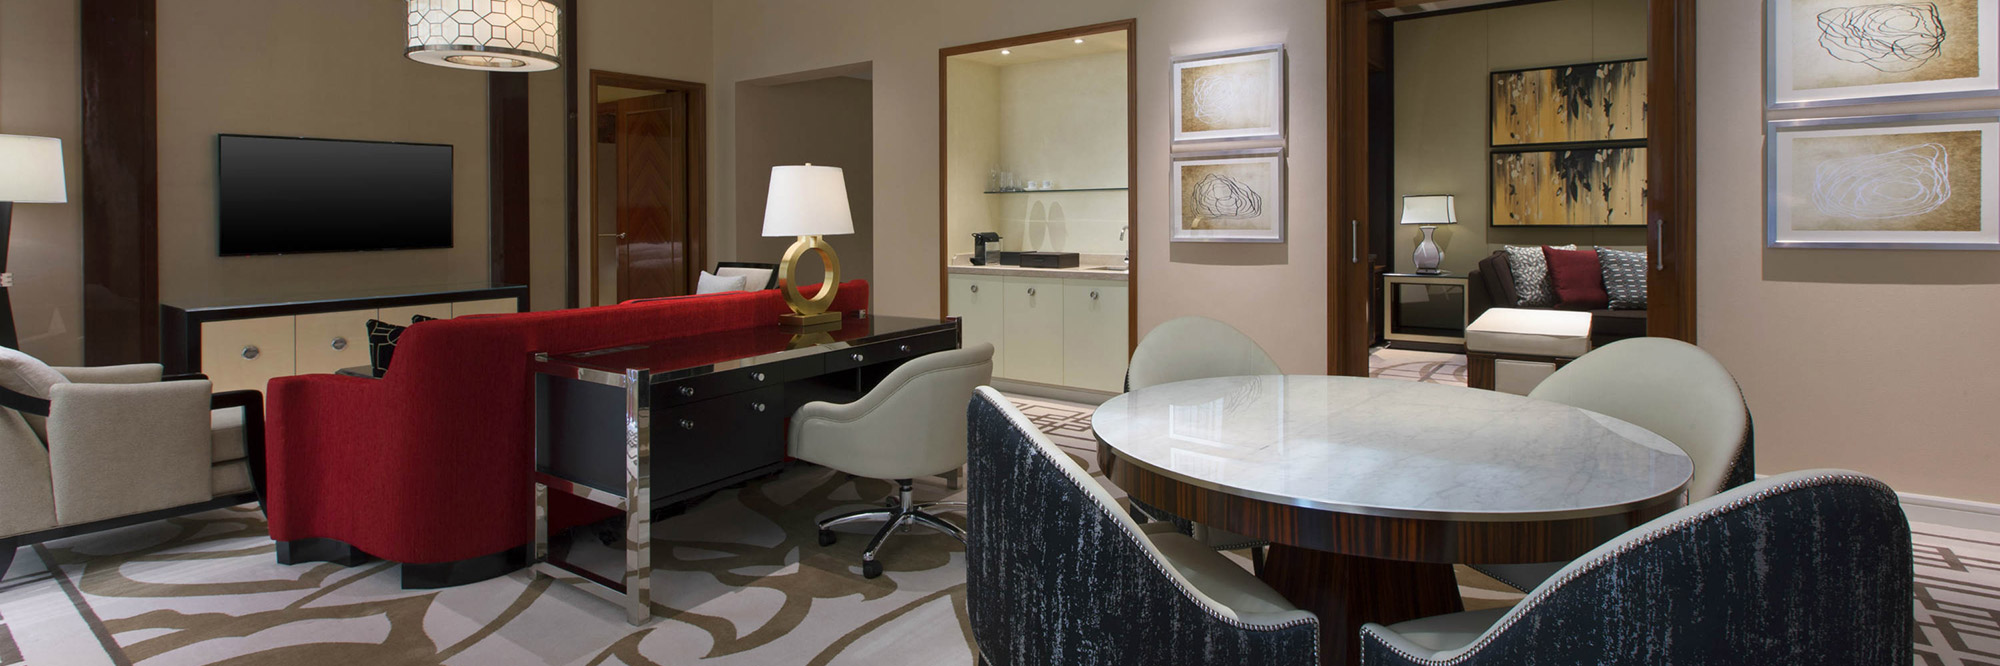 EXECUTIVE DELUXE SUITE